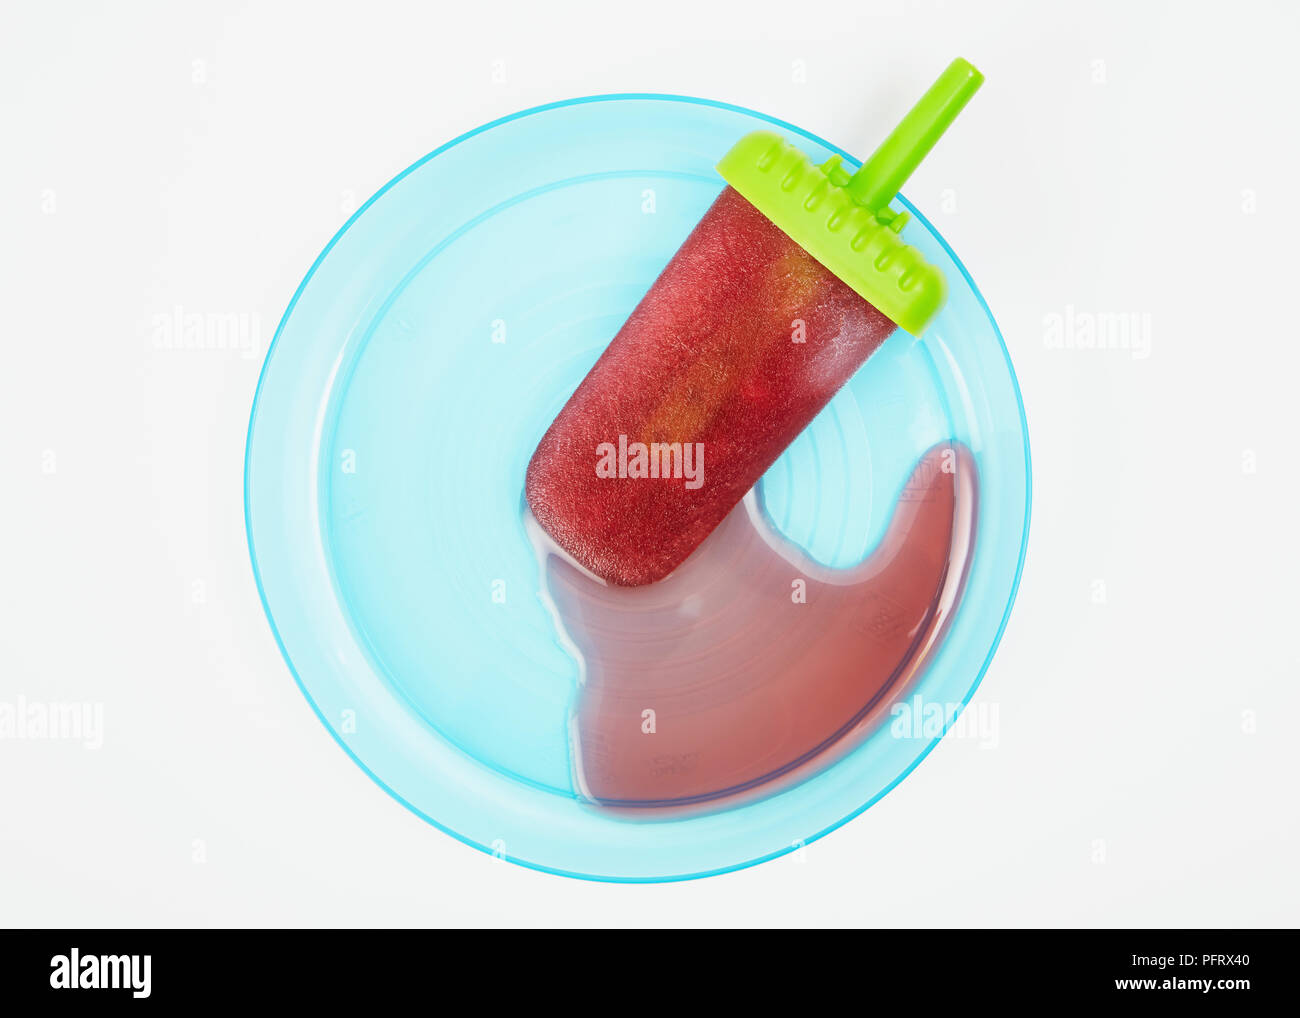 Ice lolly melting on a blue plate Stock Photo